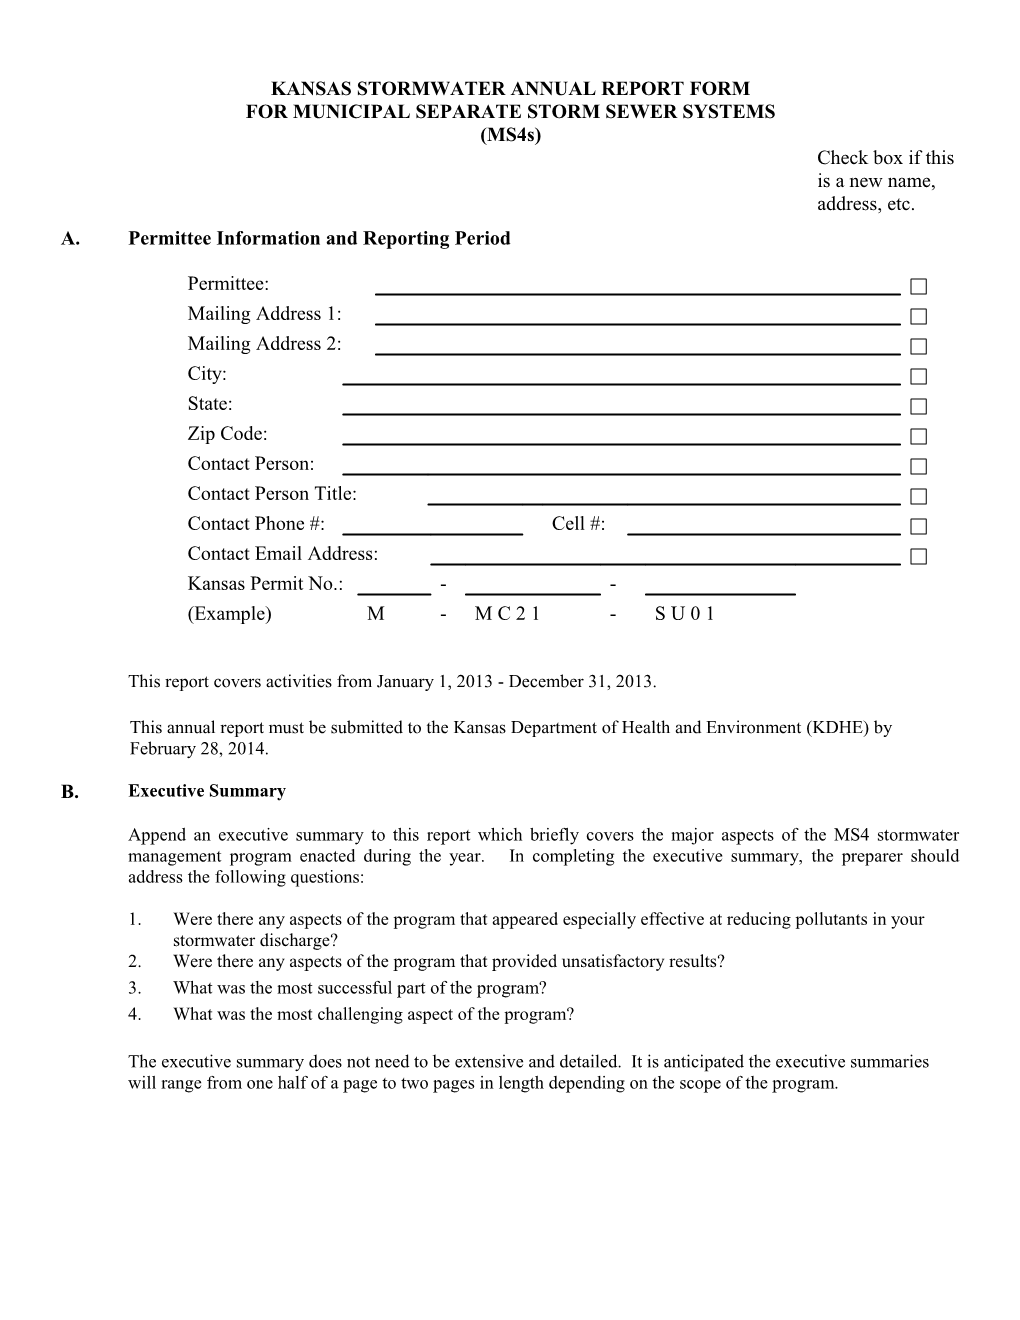 KANSAS STORMWATER ANNUAL REPORT FORM for MUNICIPAL SEPARATE STORM SEWER SYSTEMS (Ms4s)